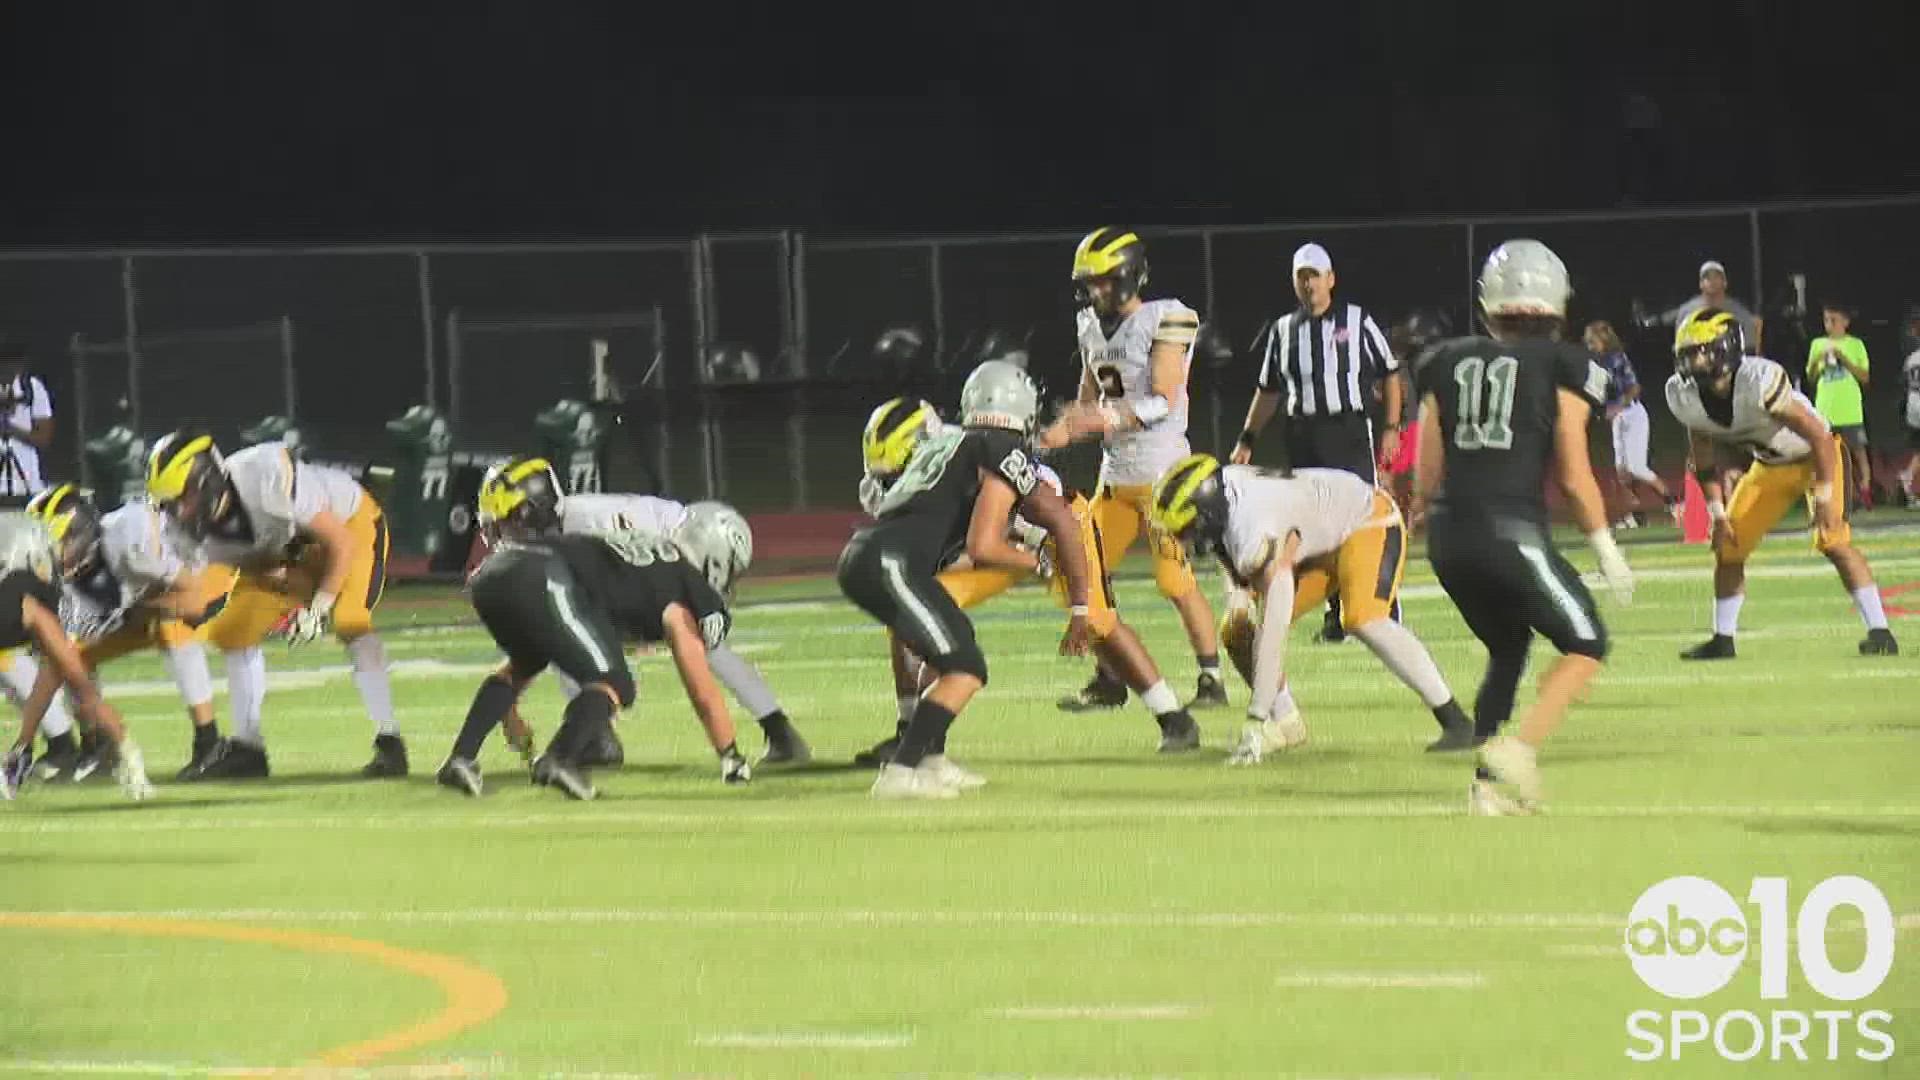 The Granite Bay Grizzlies improve to 4-1 after defeating the Del Oro Golden Eagles 28-14.